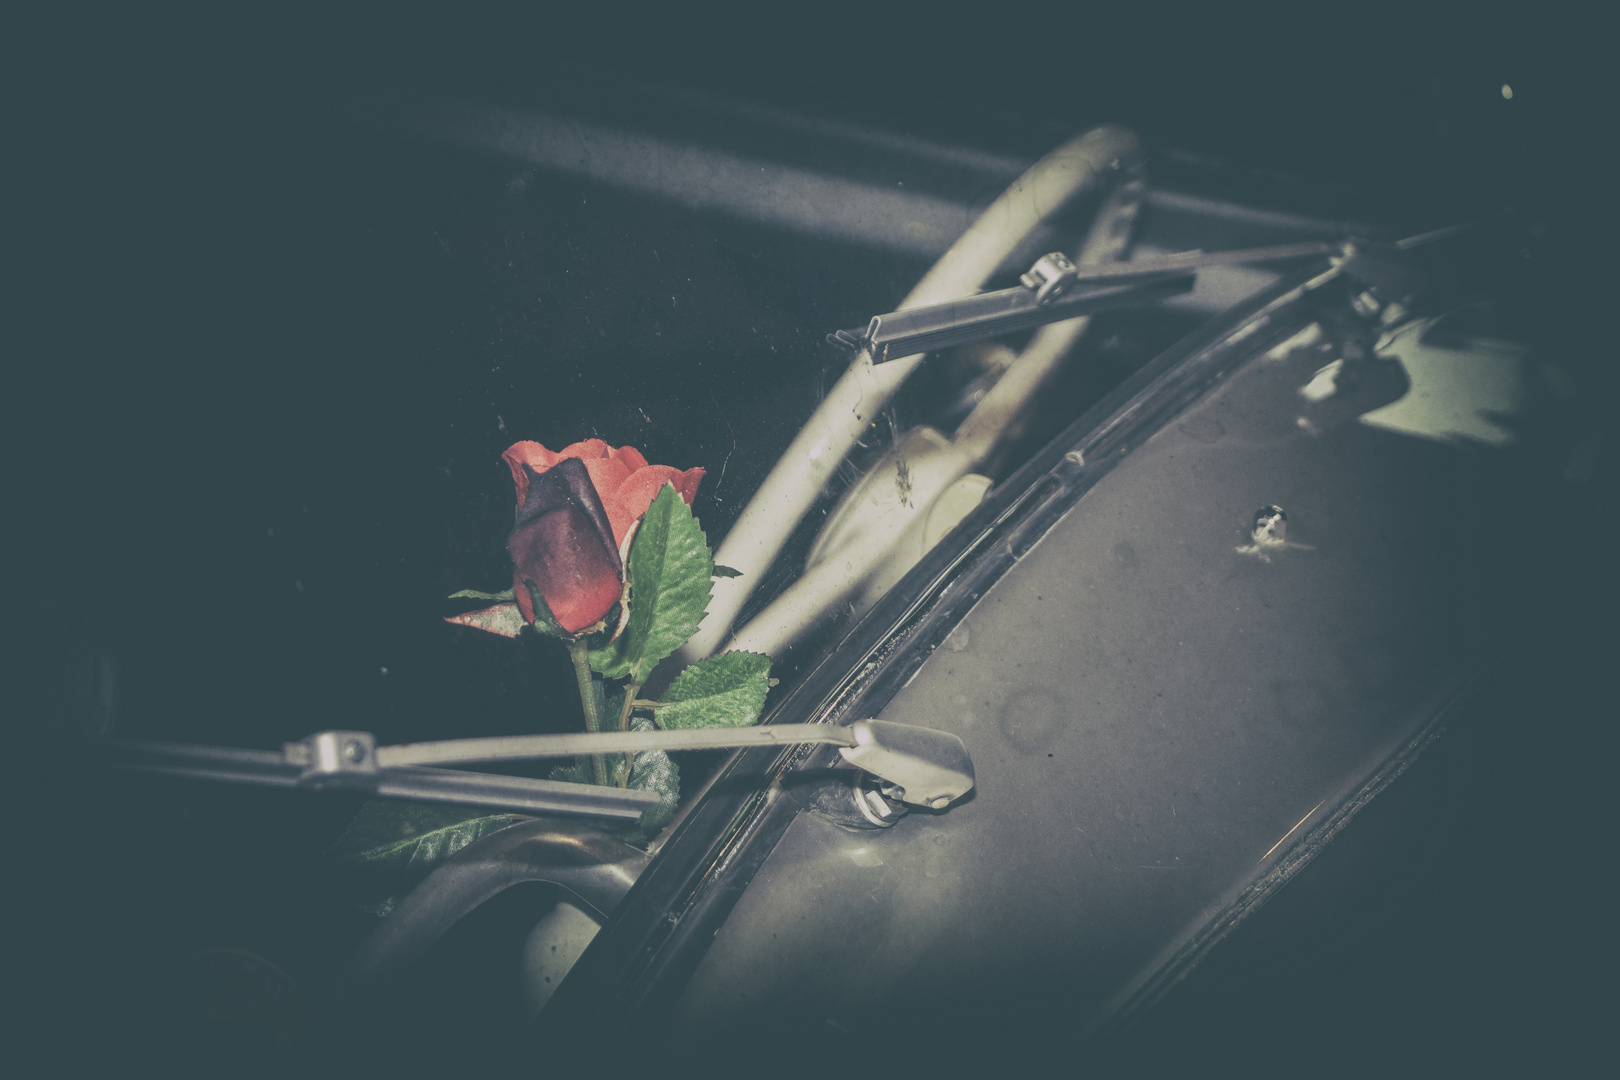 The Rose behind the windscreen